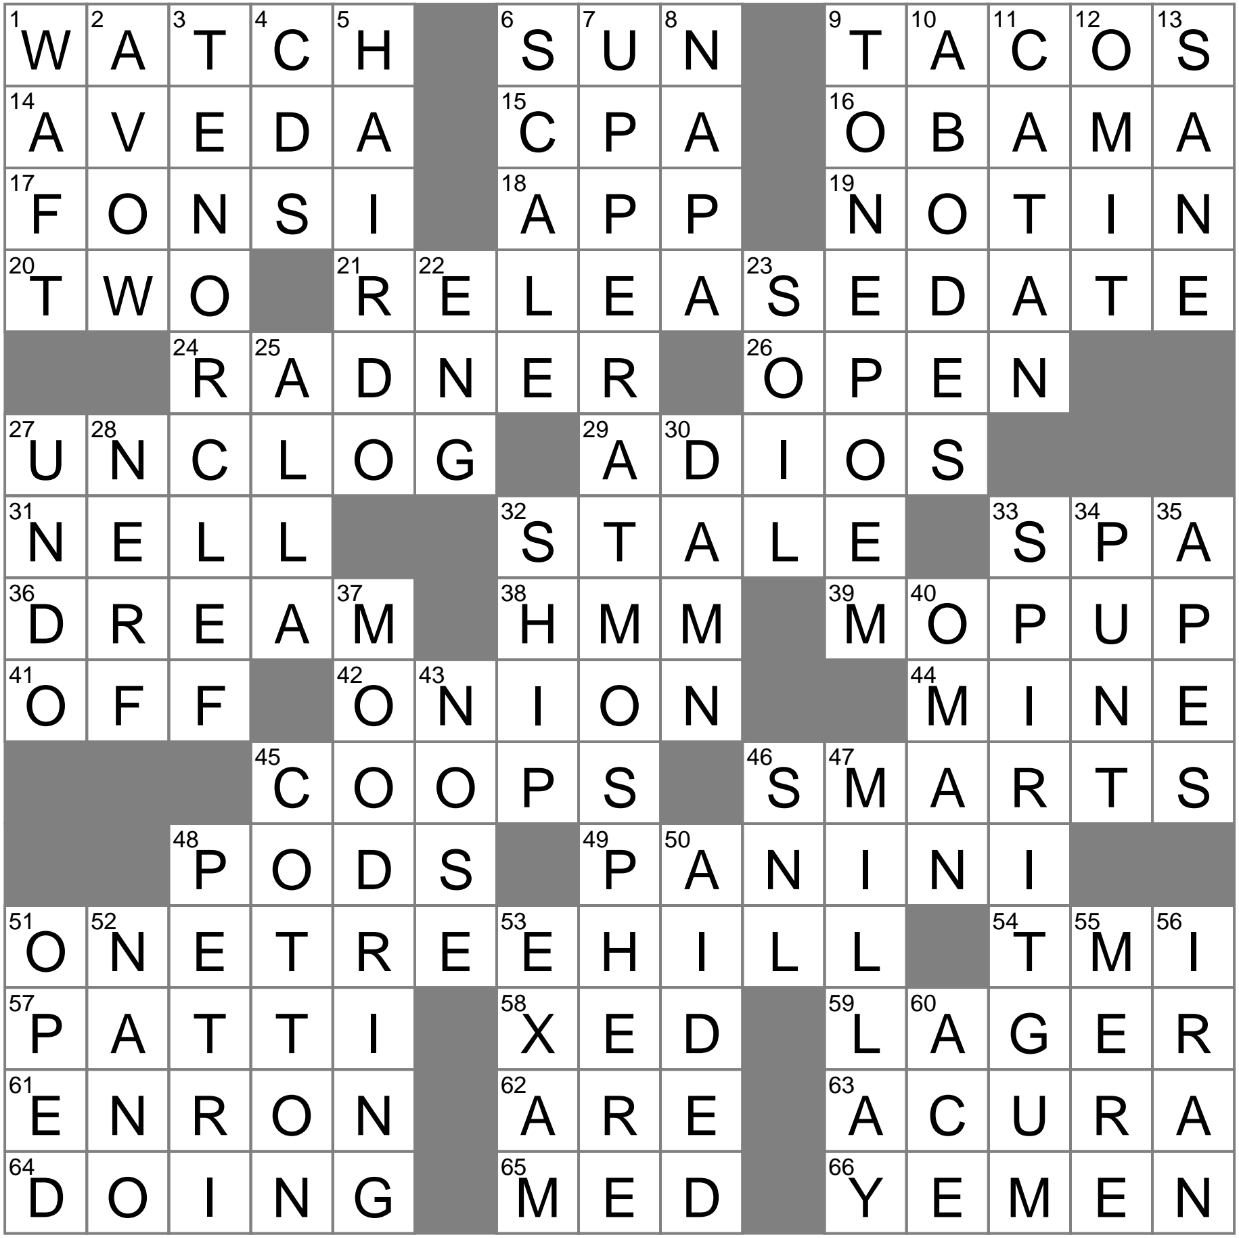 NYT Crossword Answers for Nov. 2, 2023 - The New York Times